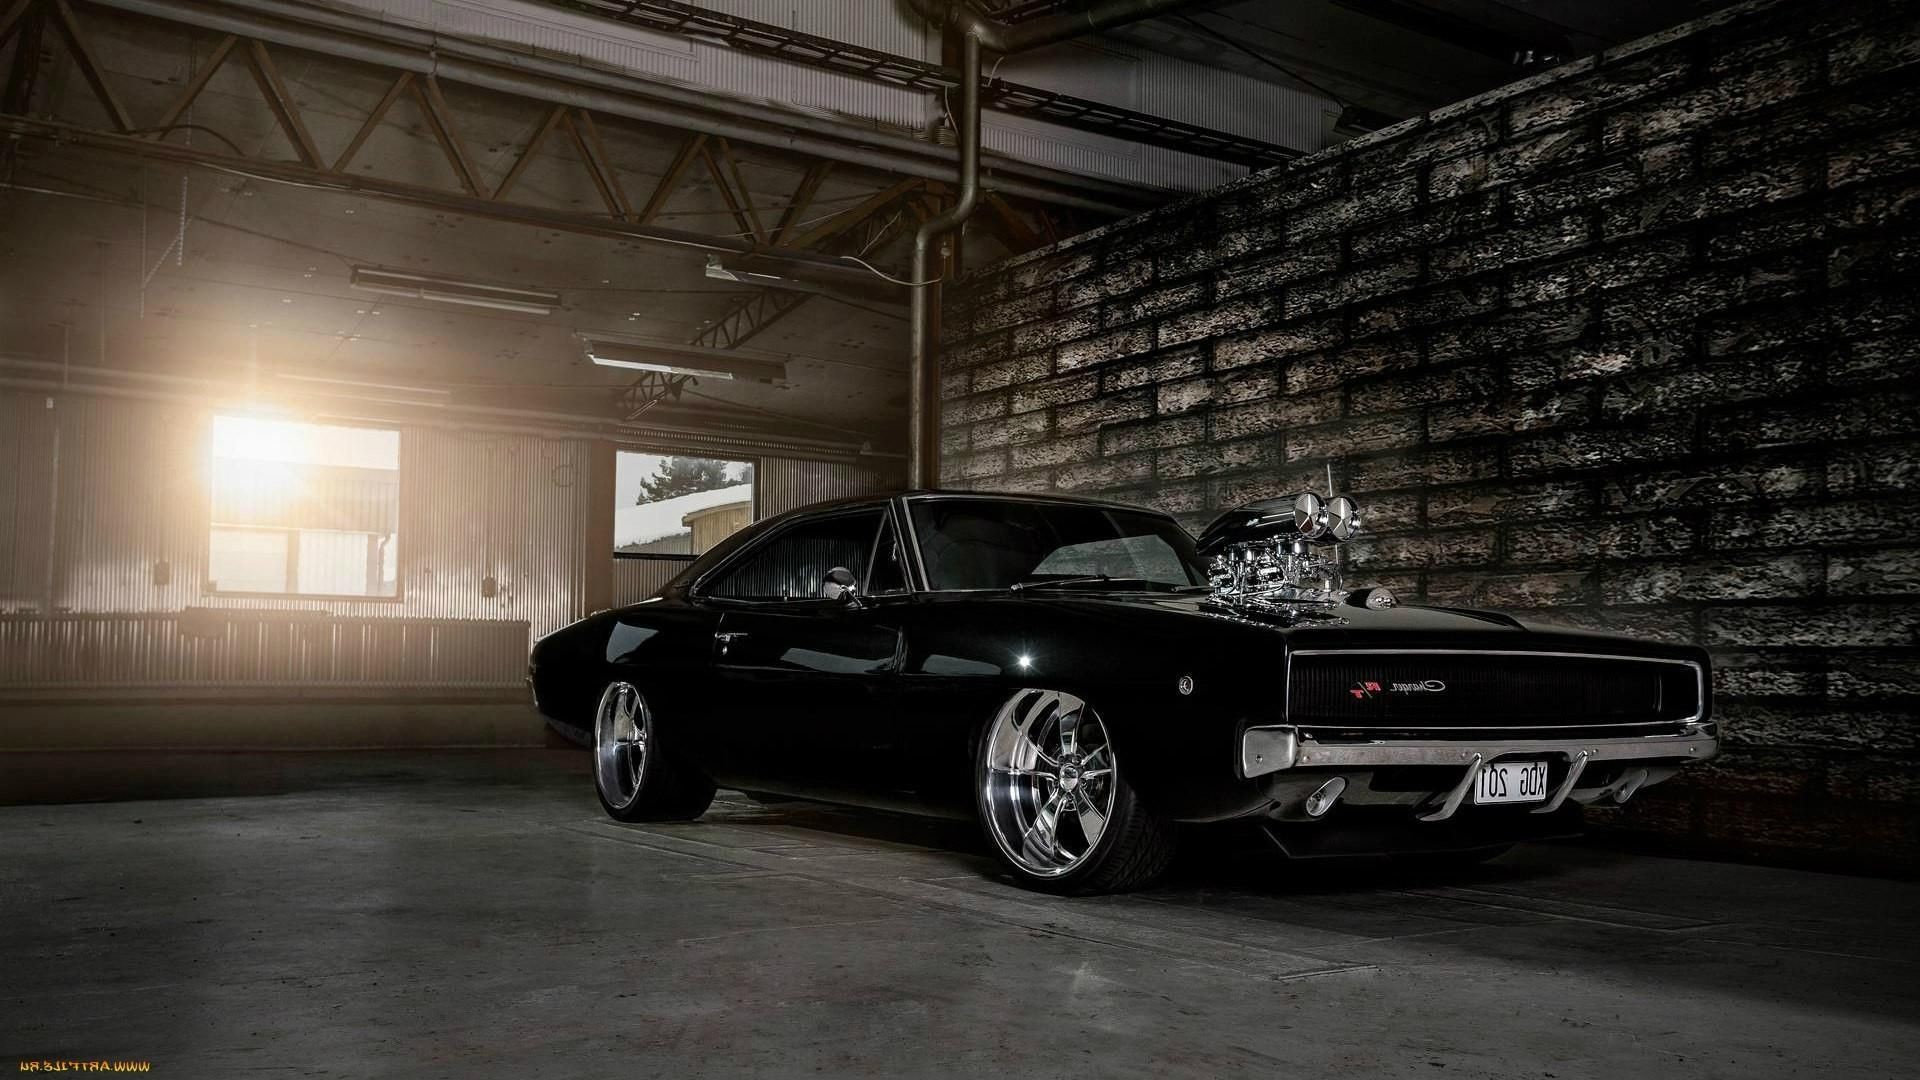 1920x1080 Dodge Charger Wallpaper HD